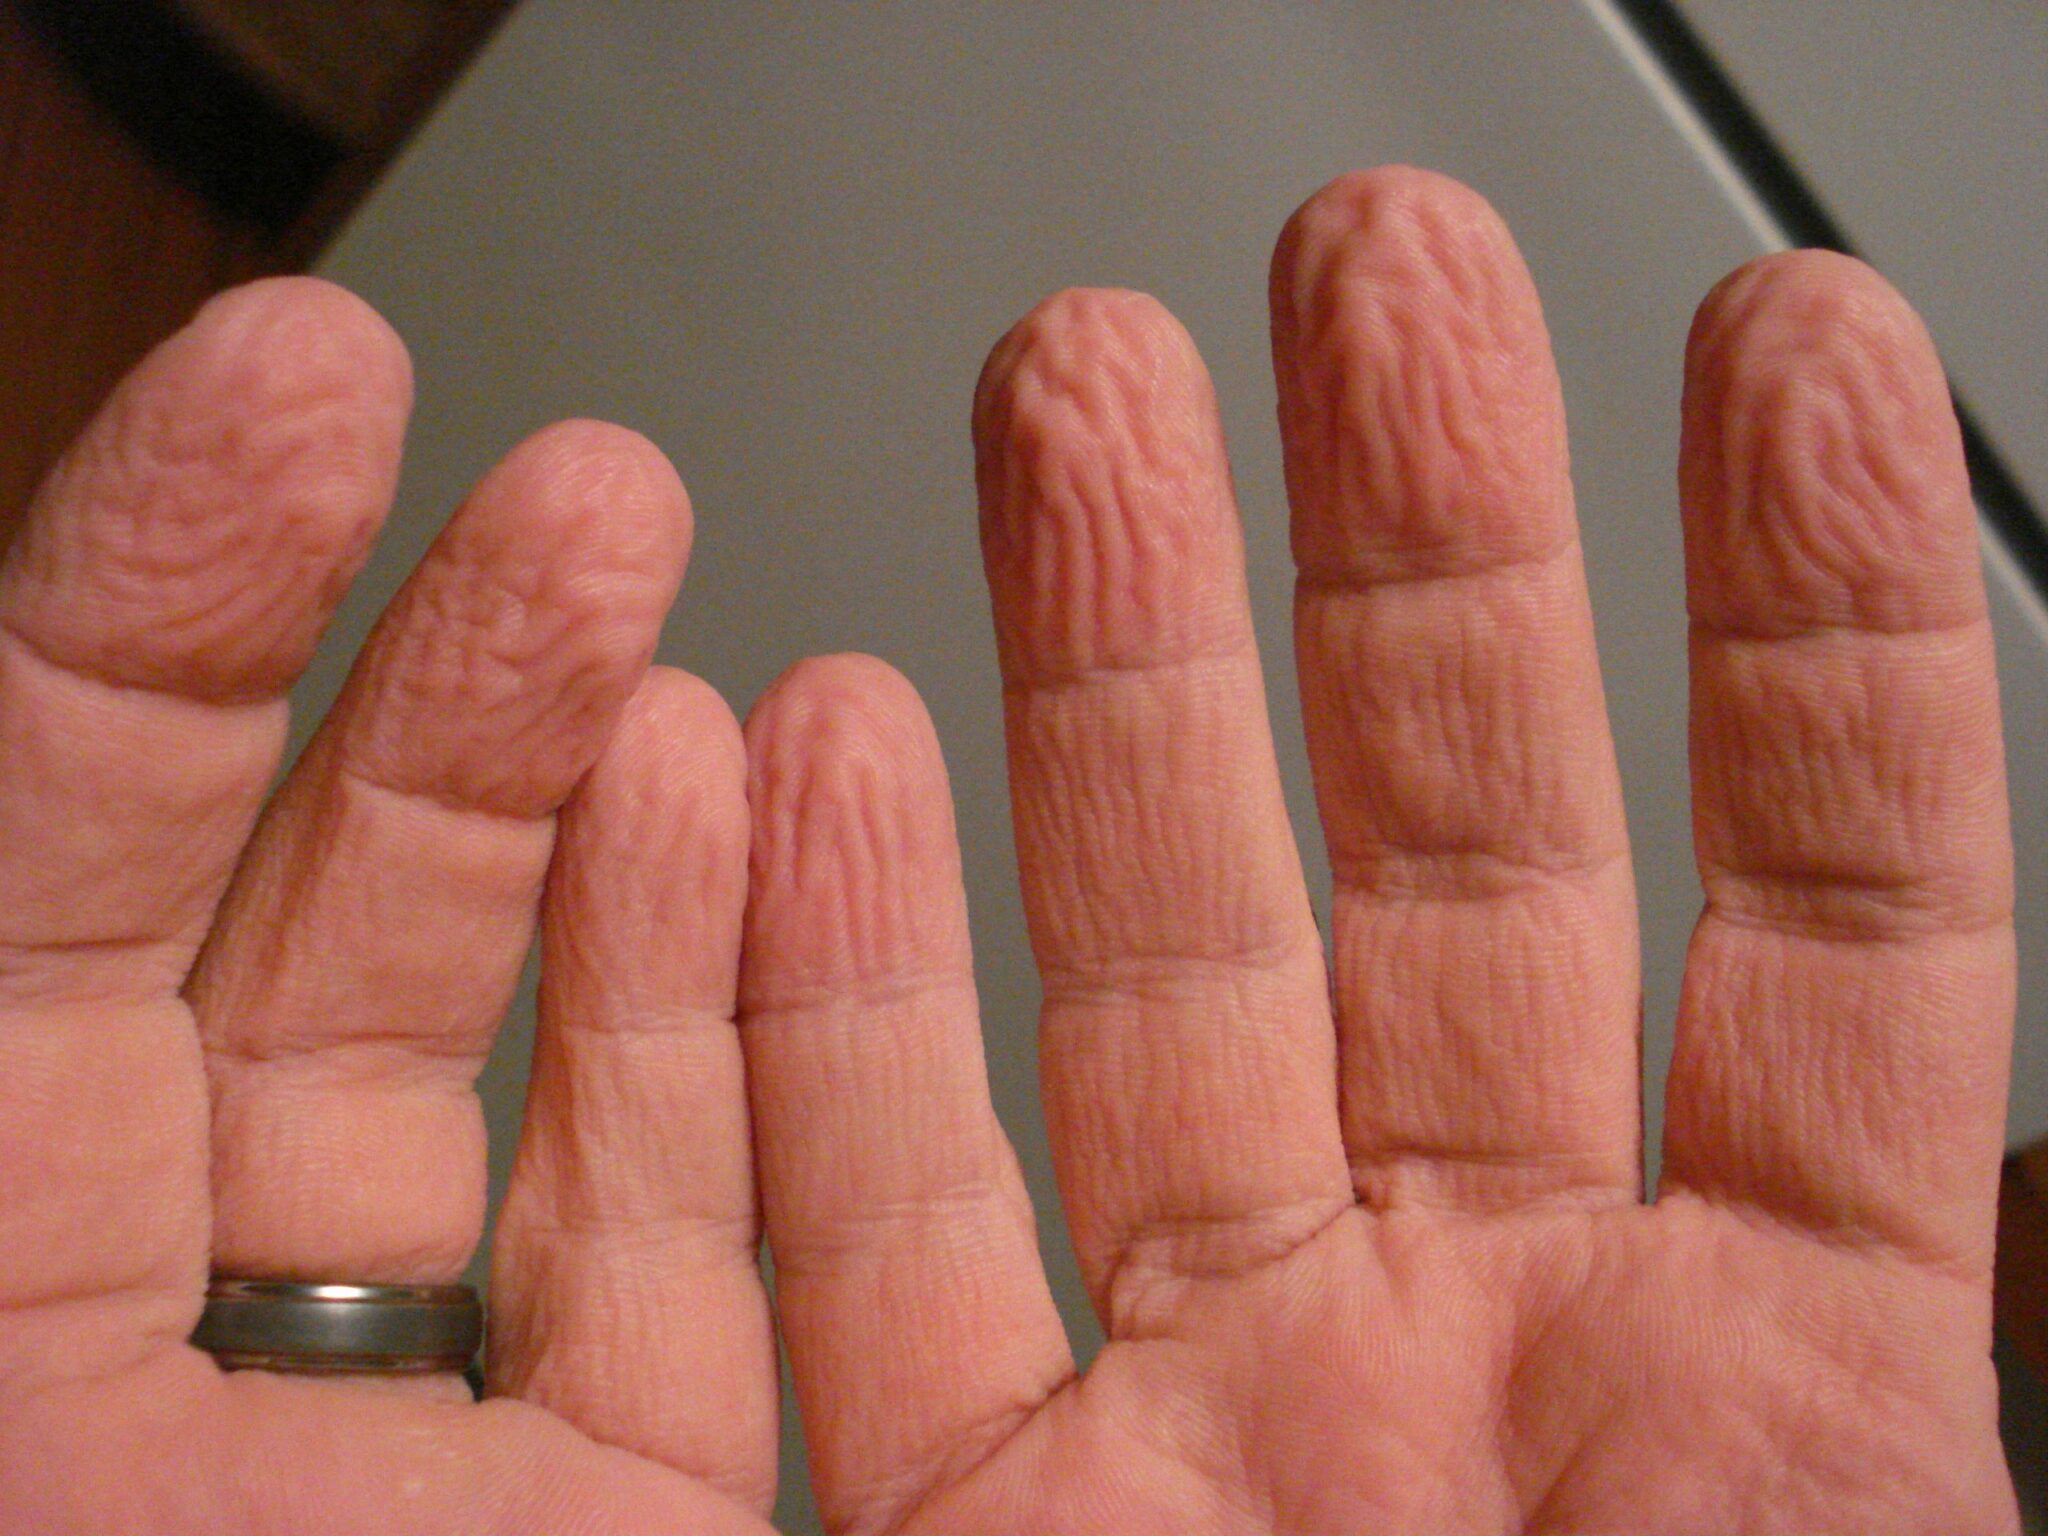 why does the skin on my fingers and toes become wrinkled after prolonged immersion in water